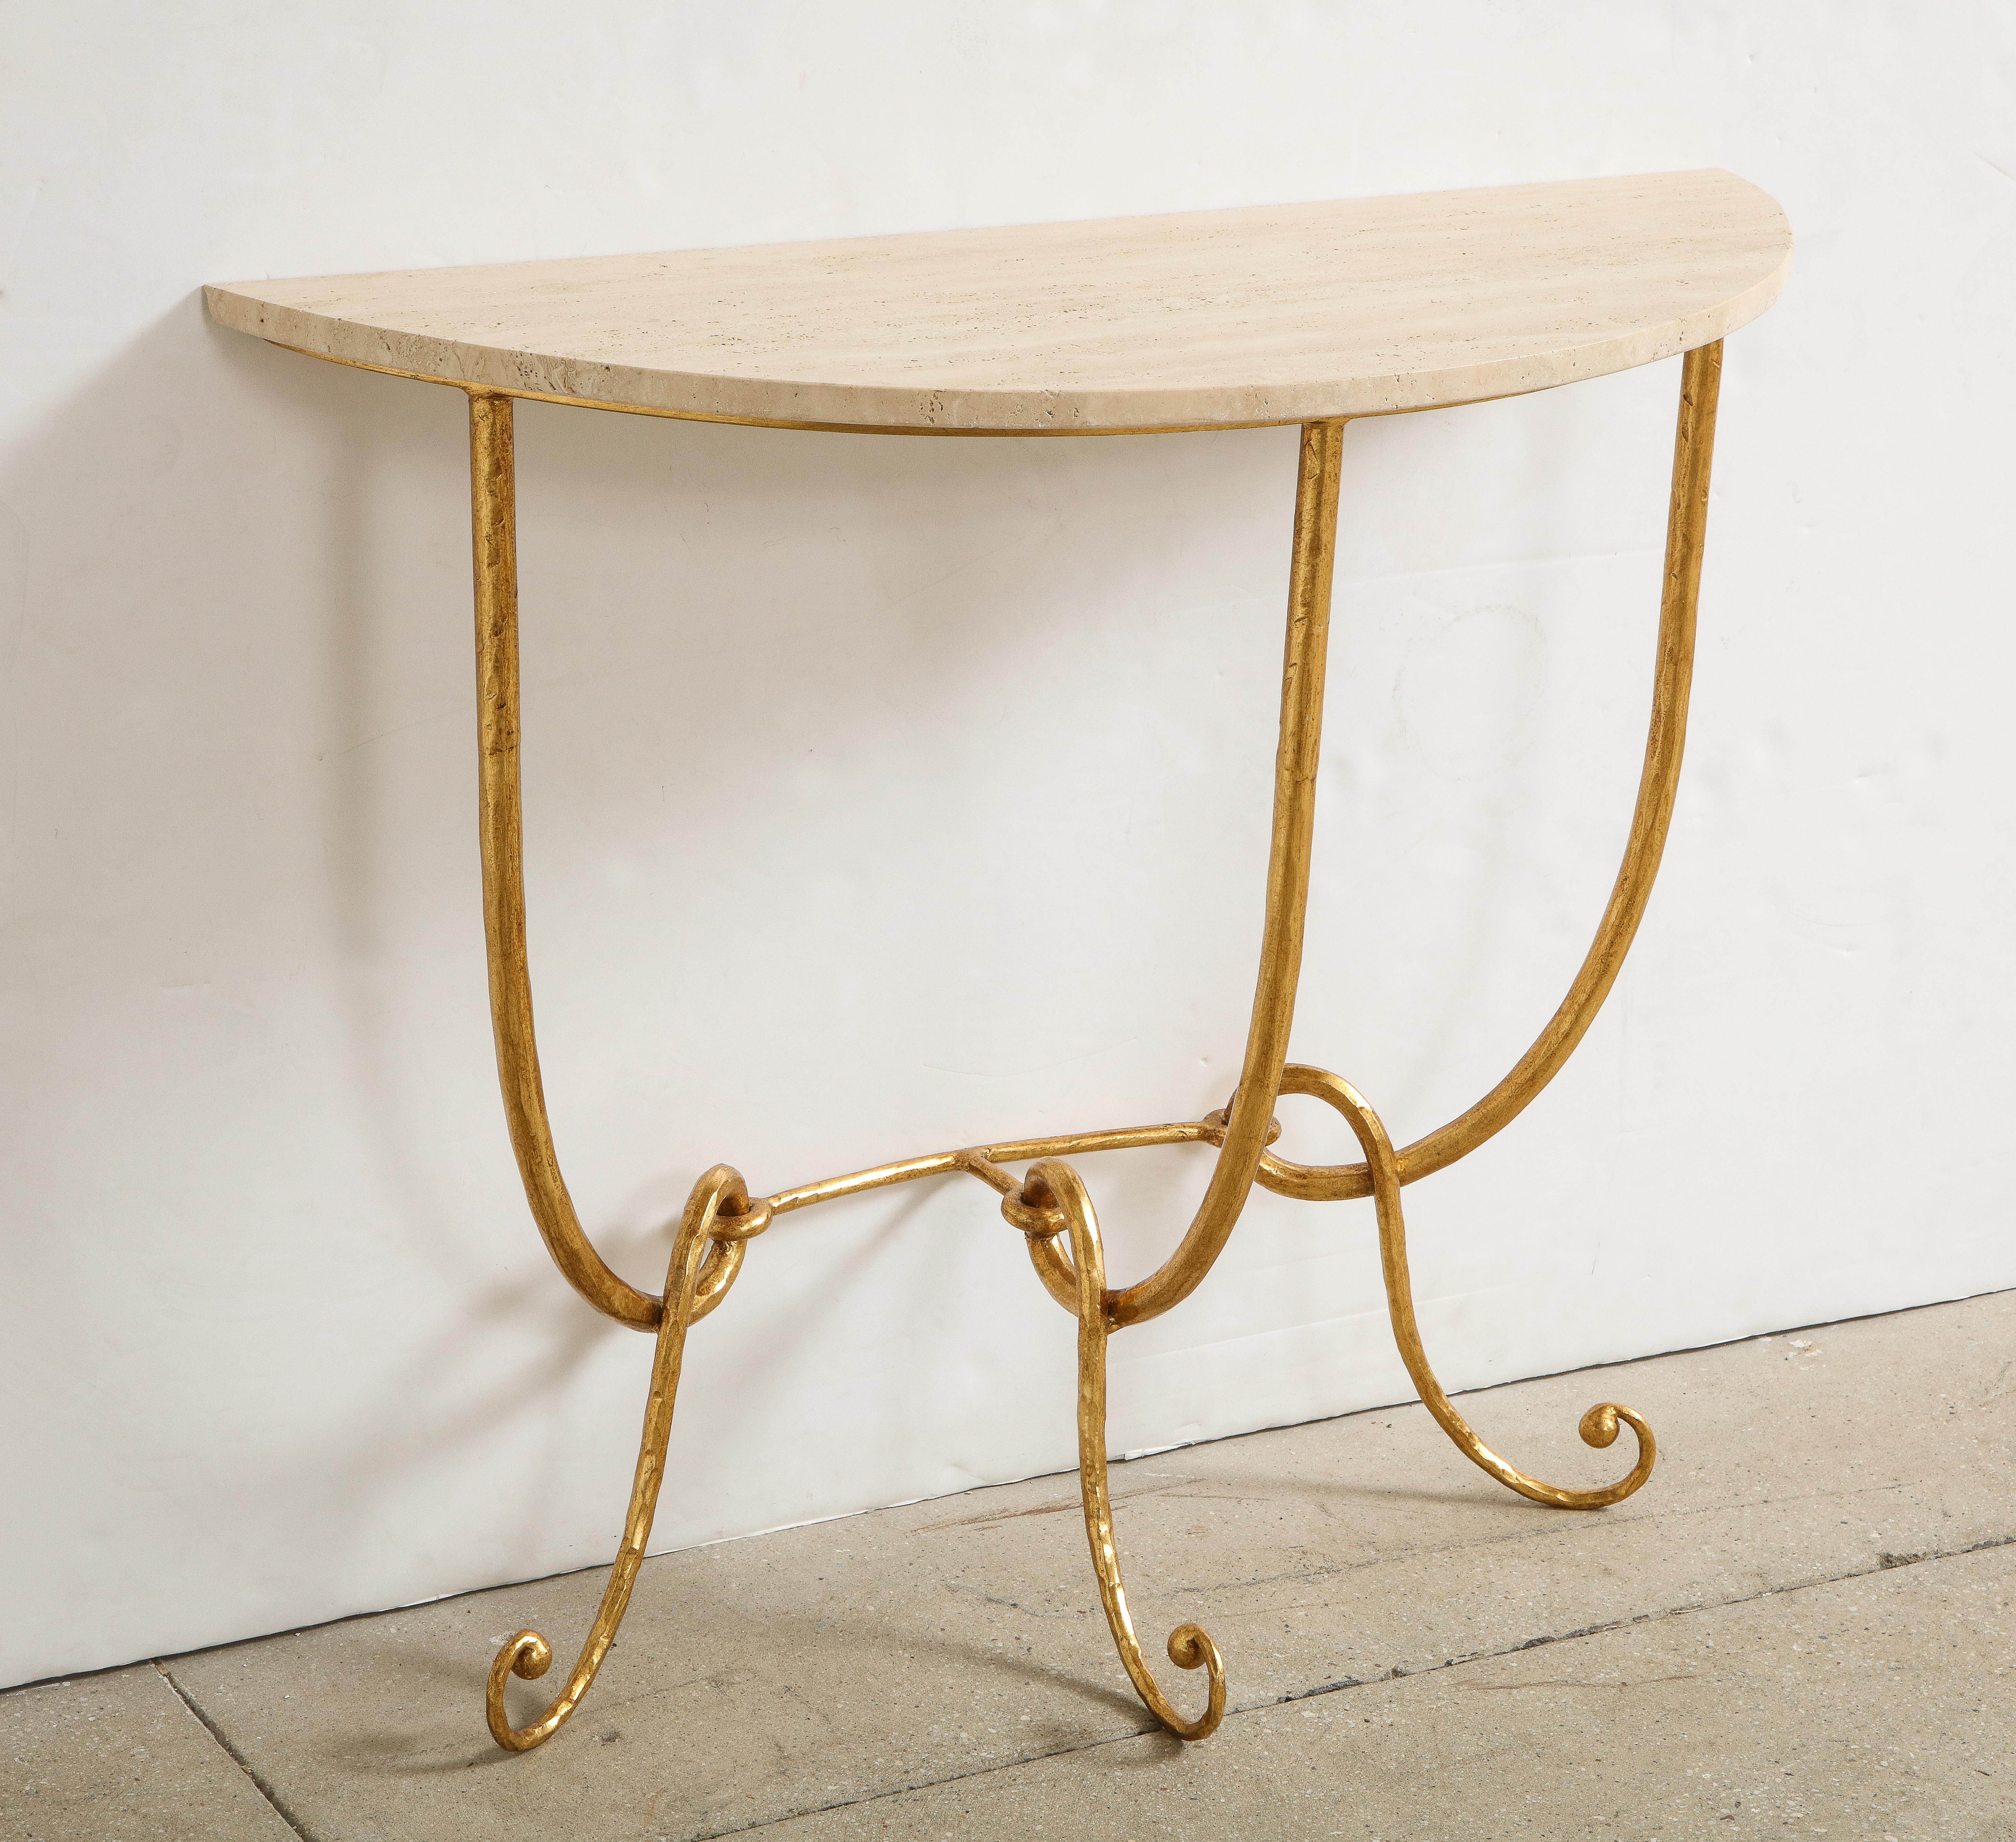 Organic Modern Italian Gilded Iron Demilune Console Table with Travertine Top